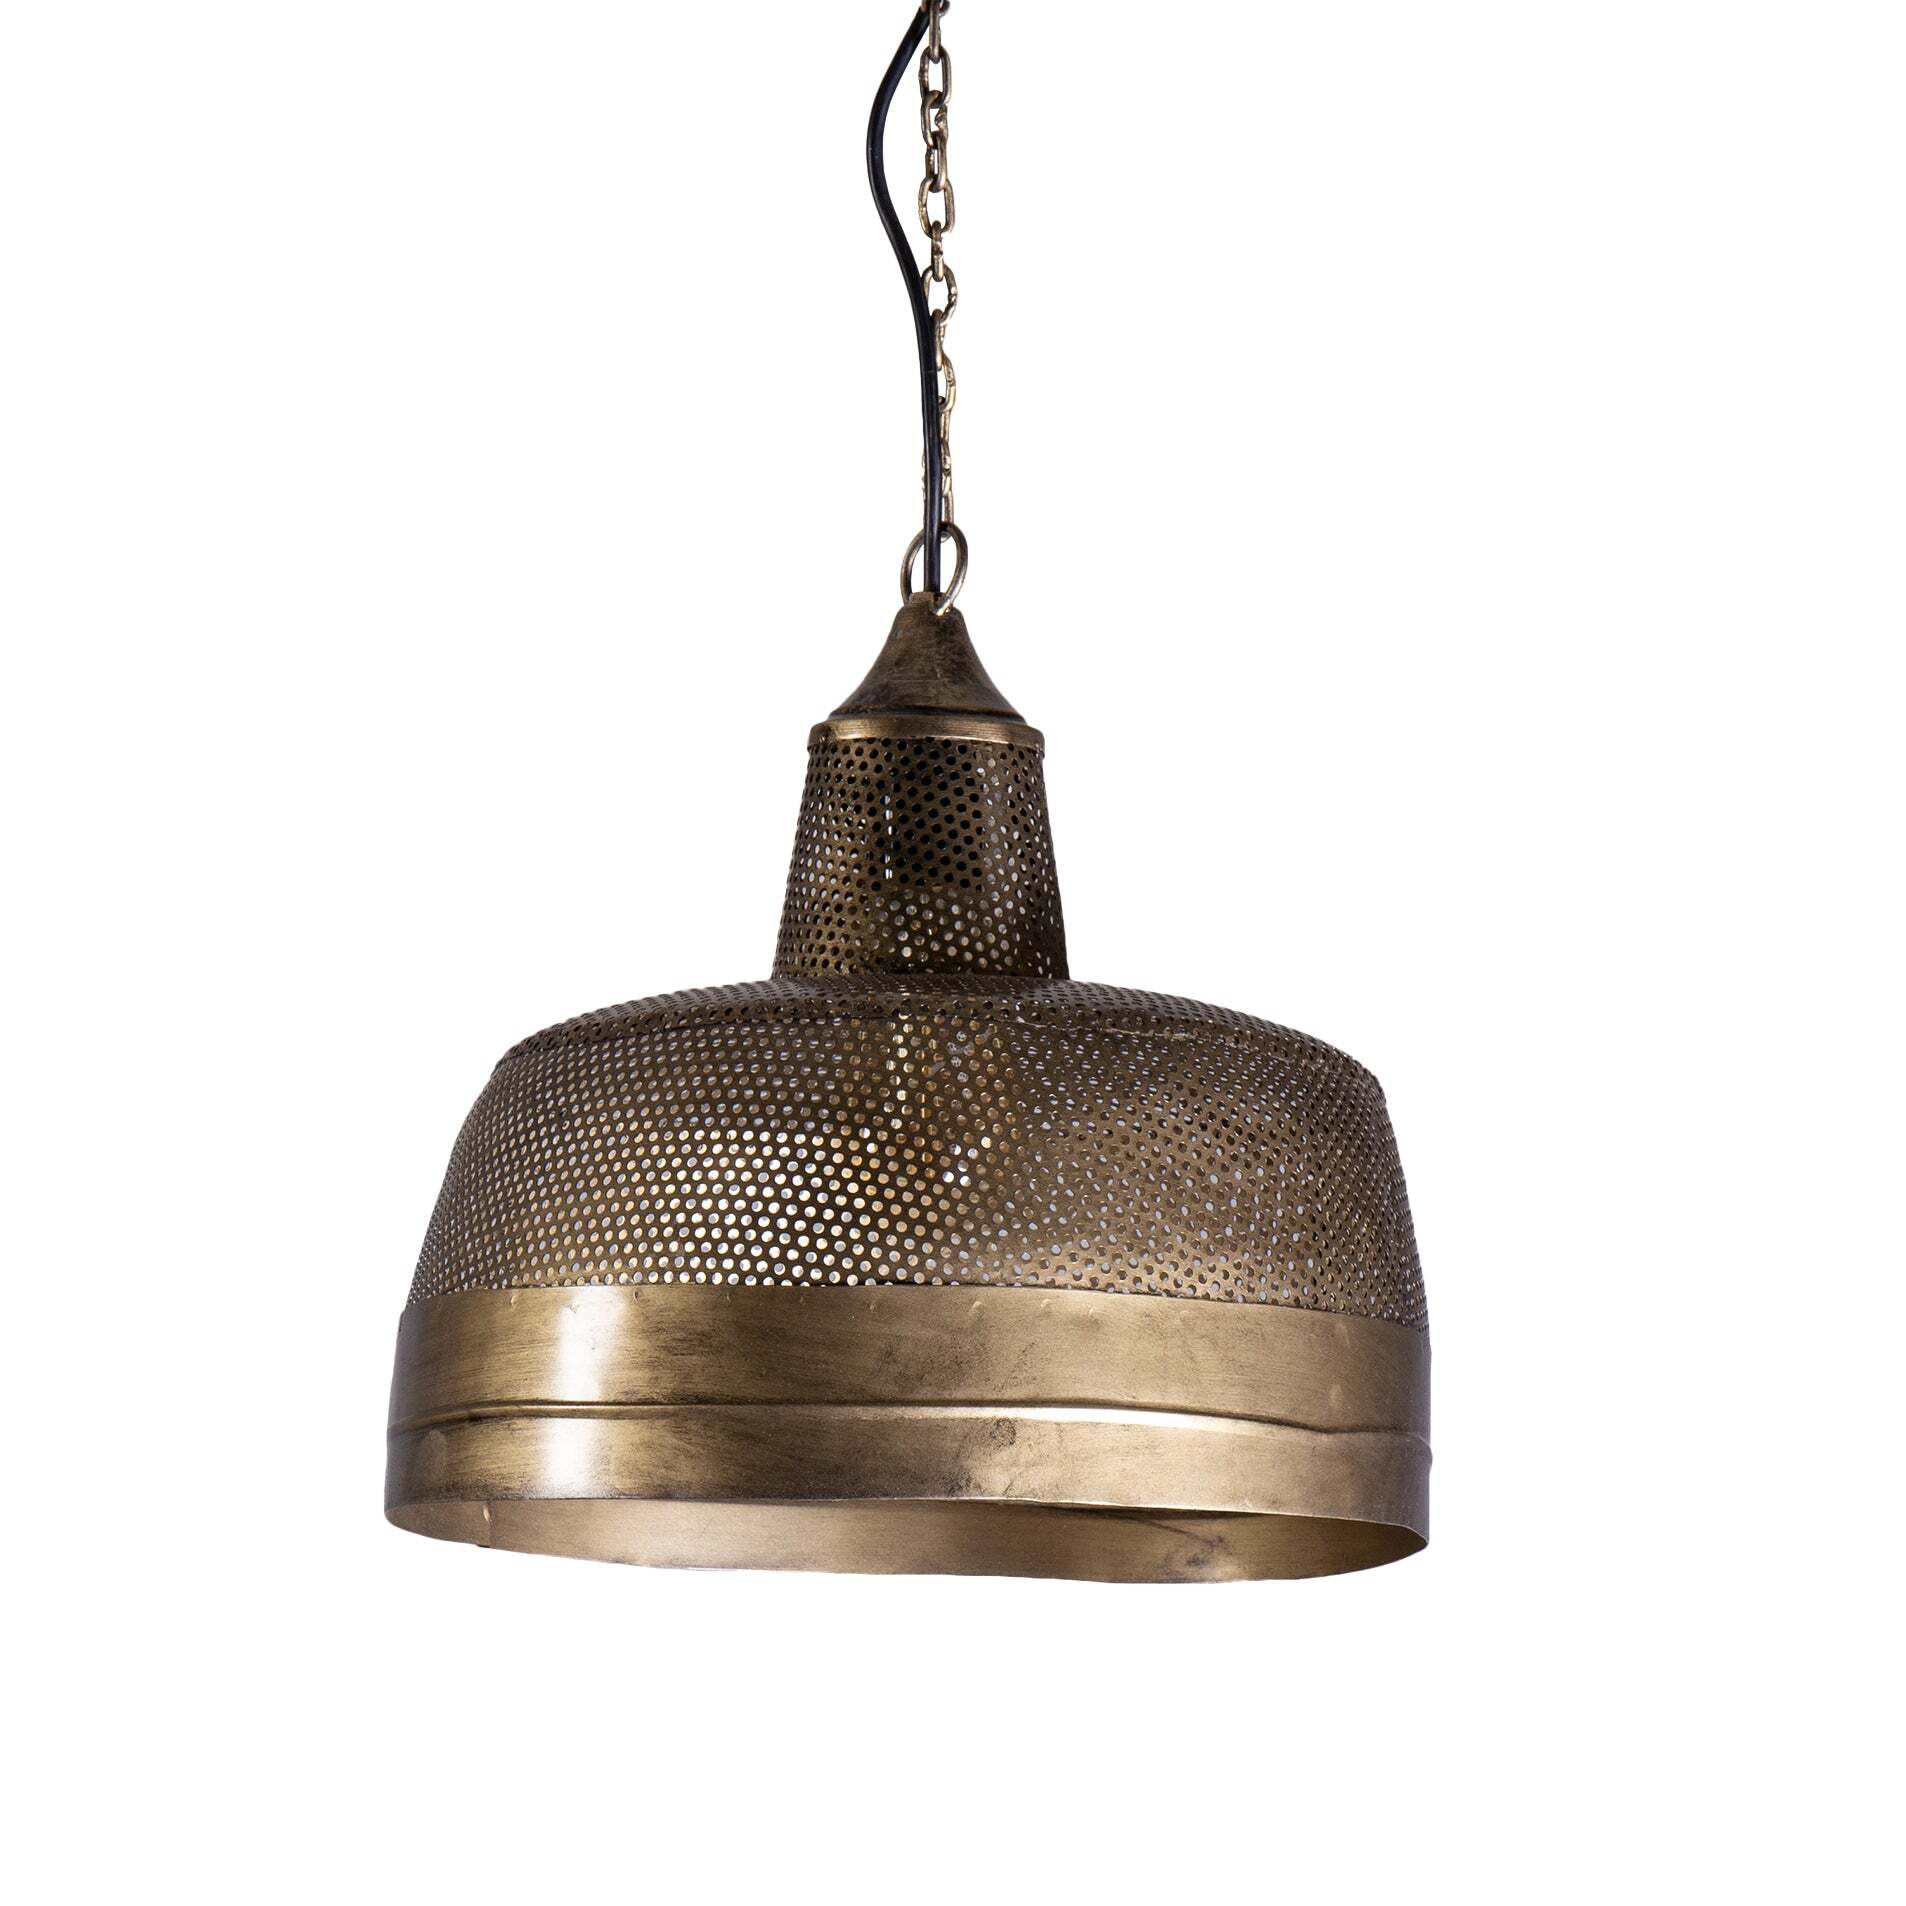 Moroccan Style Ceiling Pendant Light - image 1